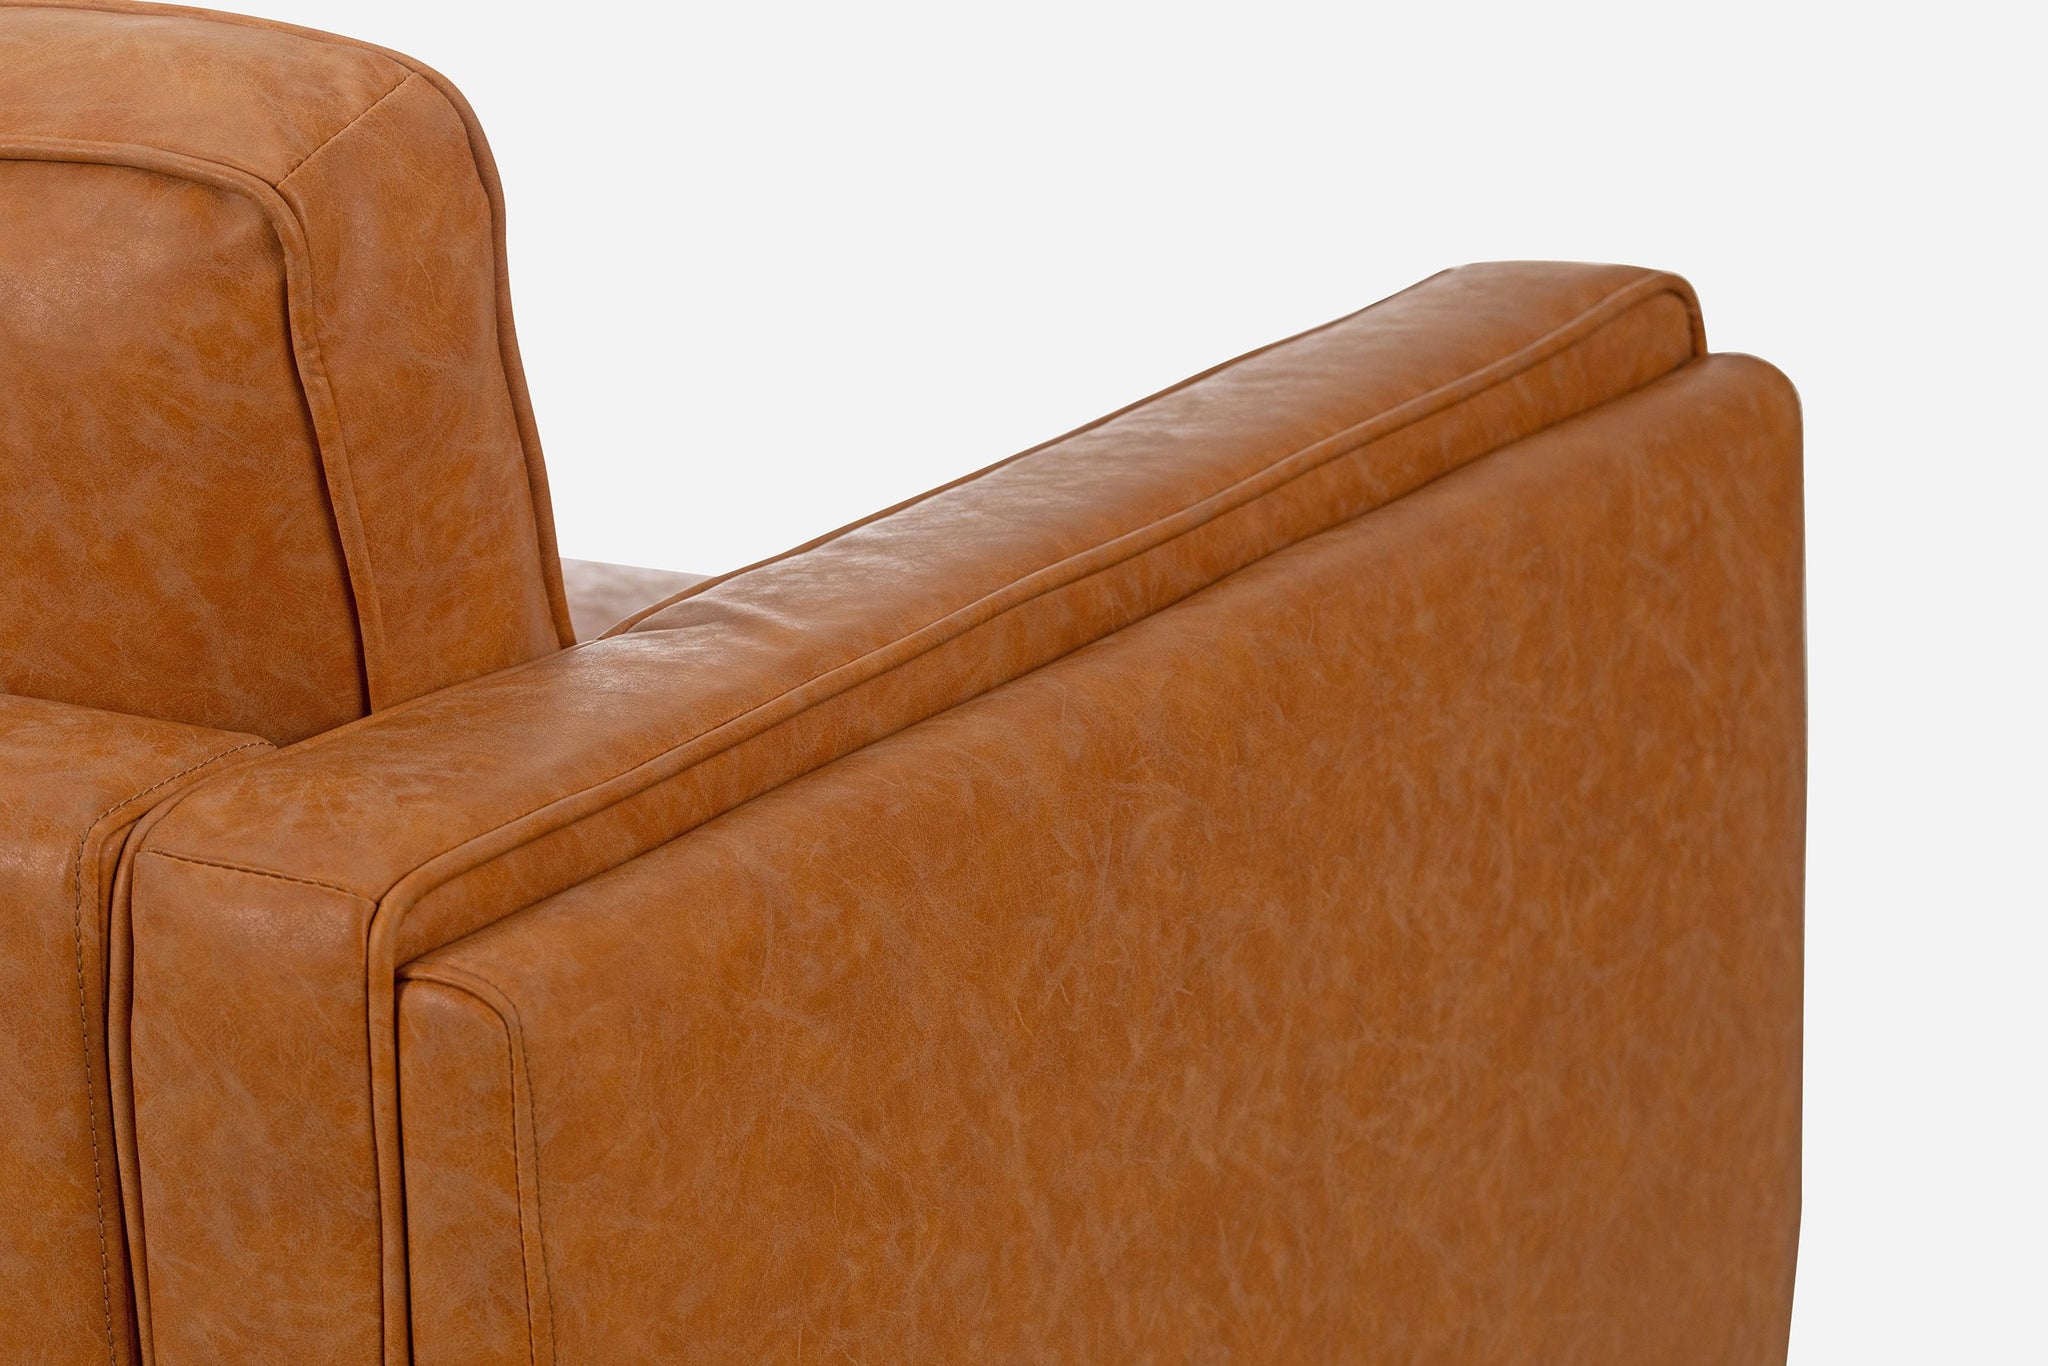 albany armchair shown in distressed vegan leather with walnut legs